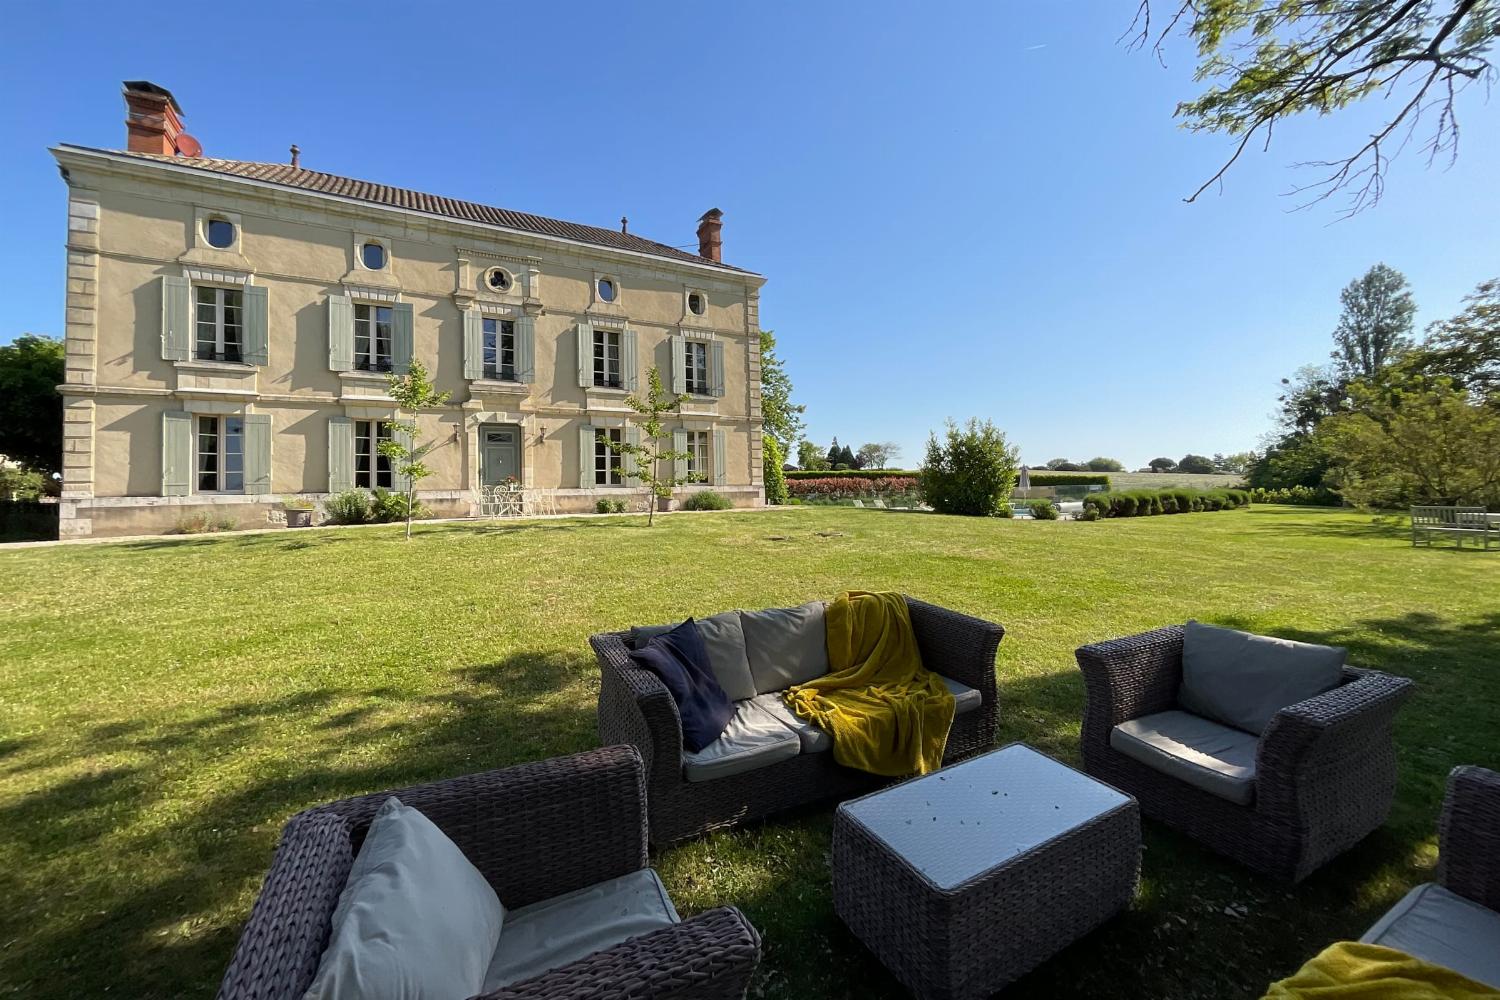 Rental accommodation in Nouvelle-Aquitaine